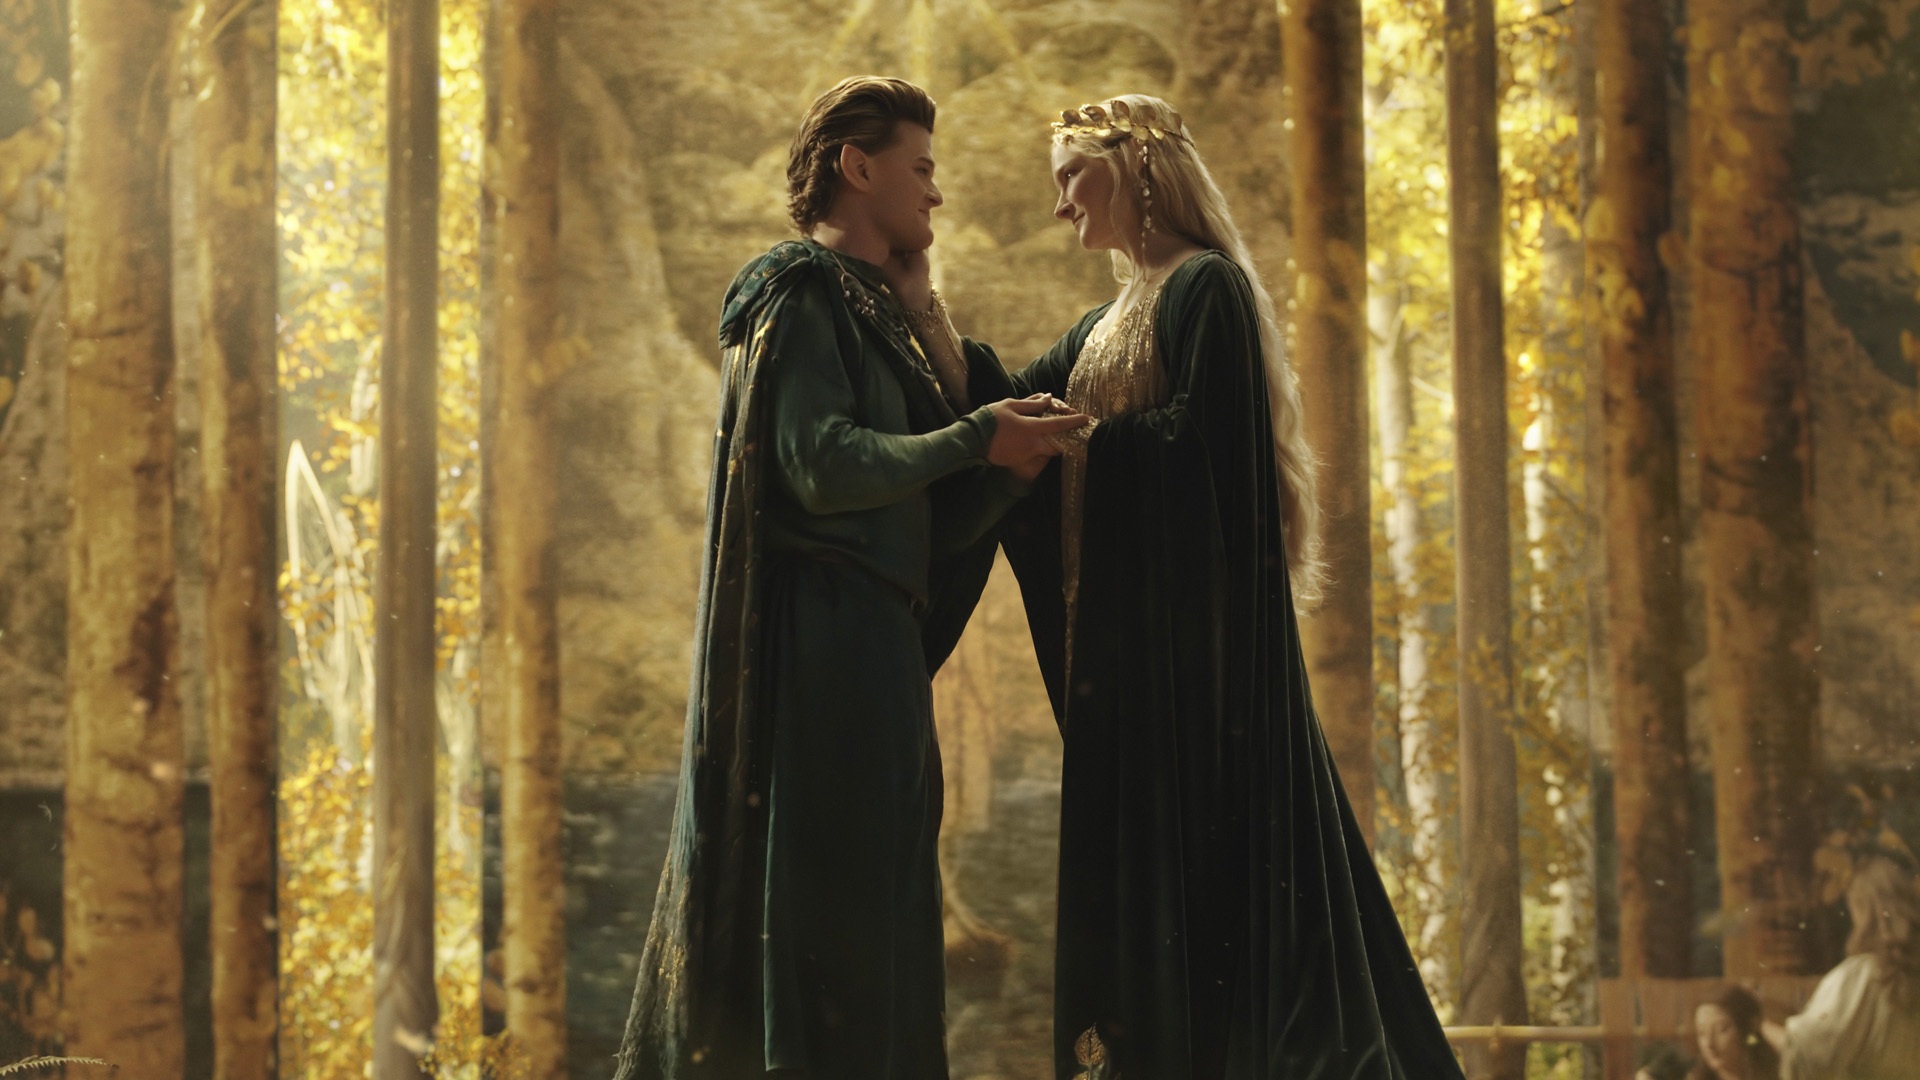 Elrond and Galadriel embrace as they reunite in Lothlorien in The Rings of Power episode 1